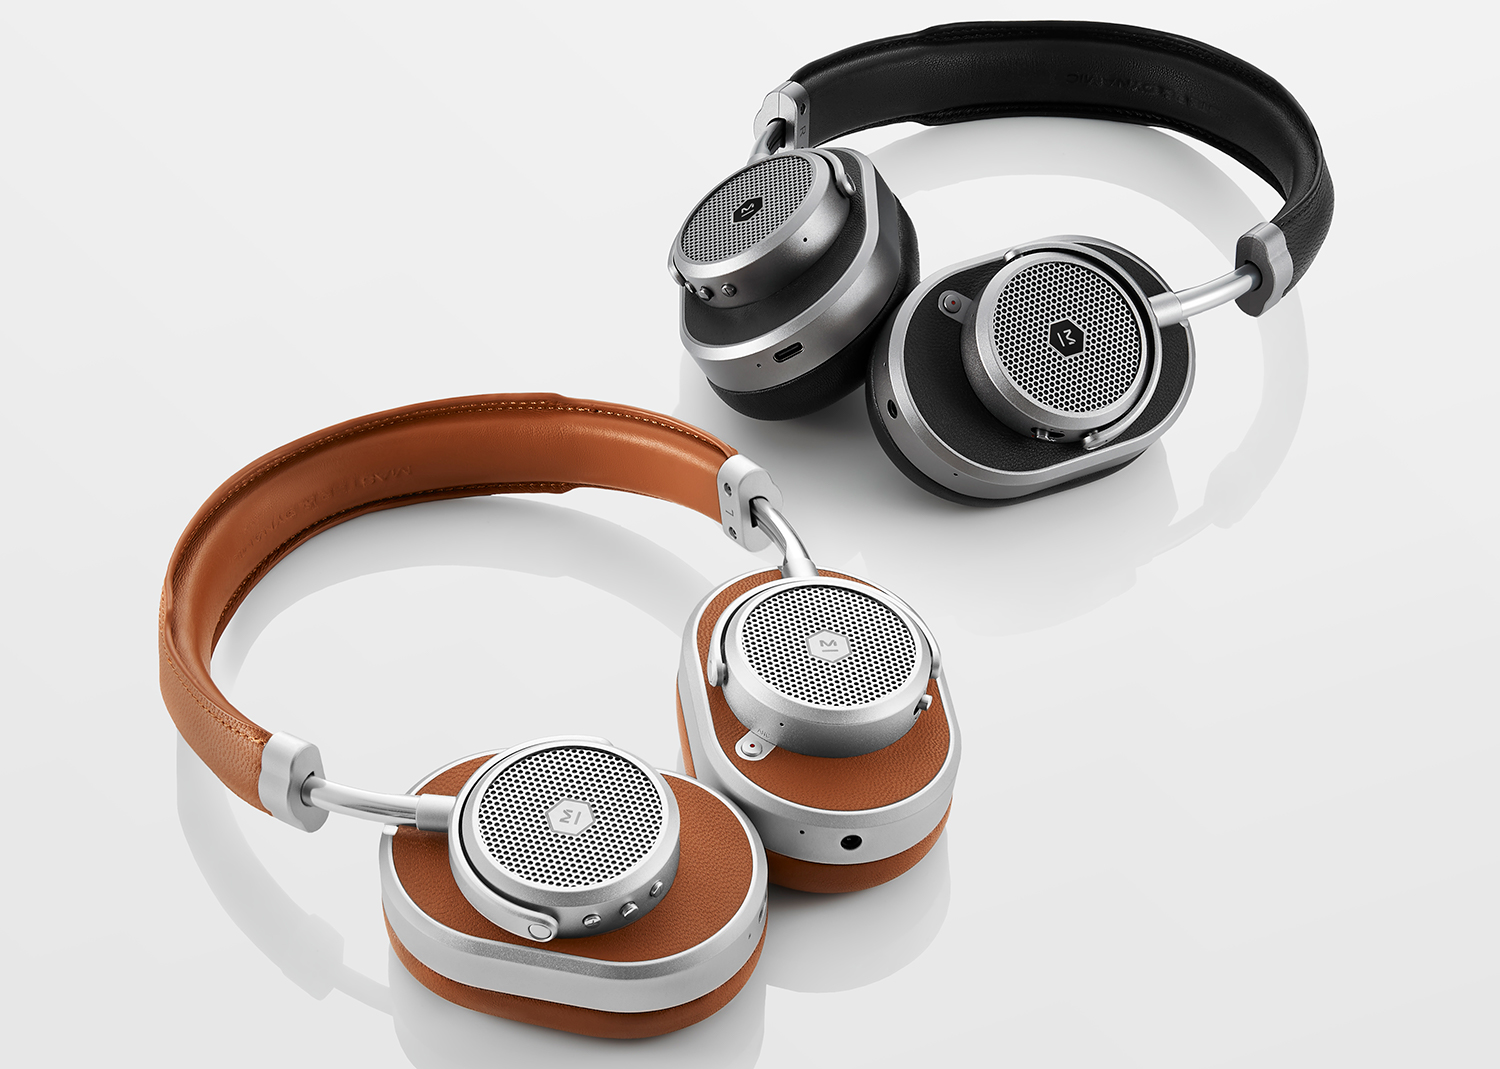 Master & Dynamic's first noise cancelling wireless headphones blew